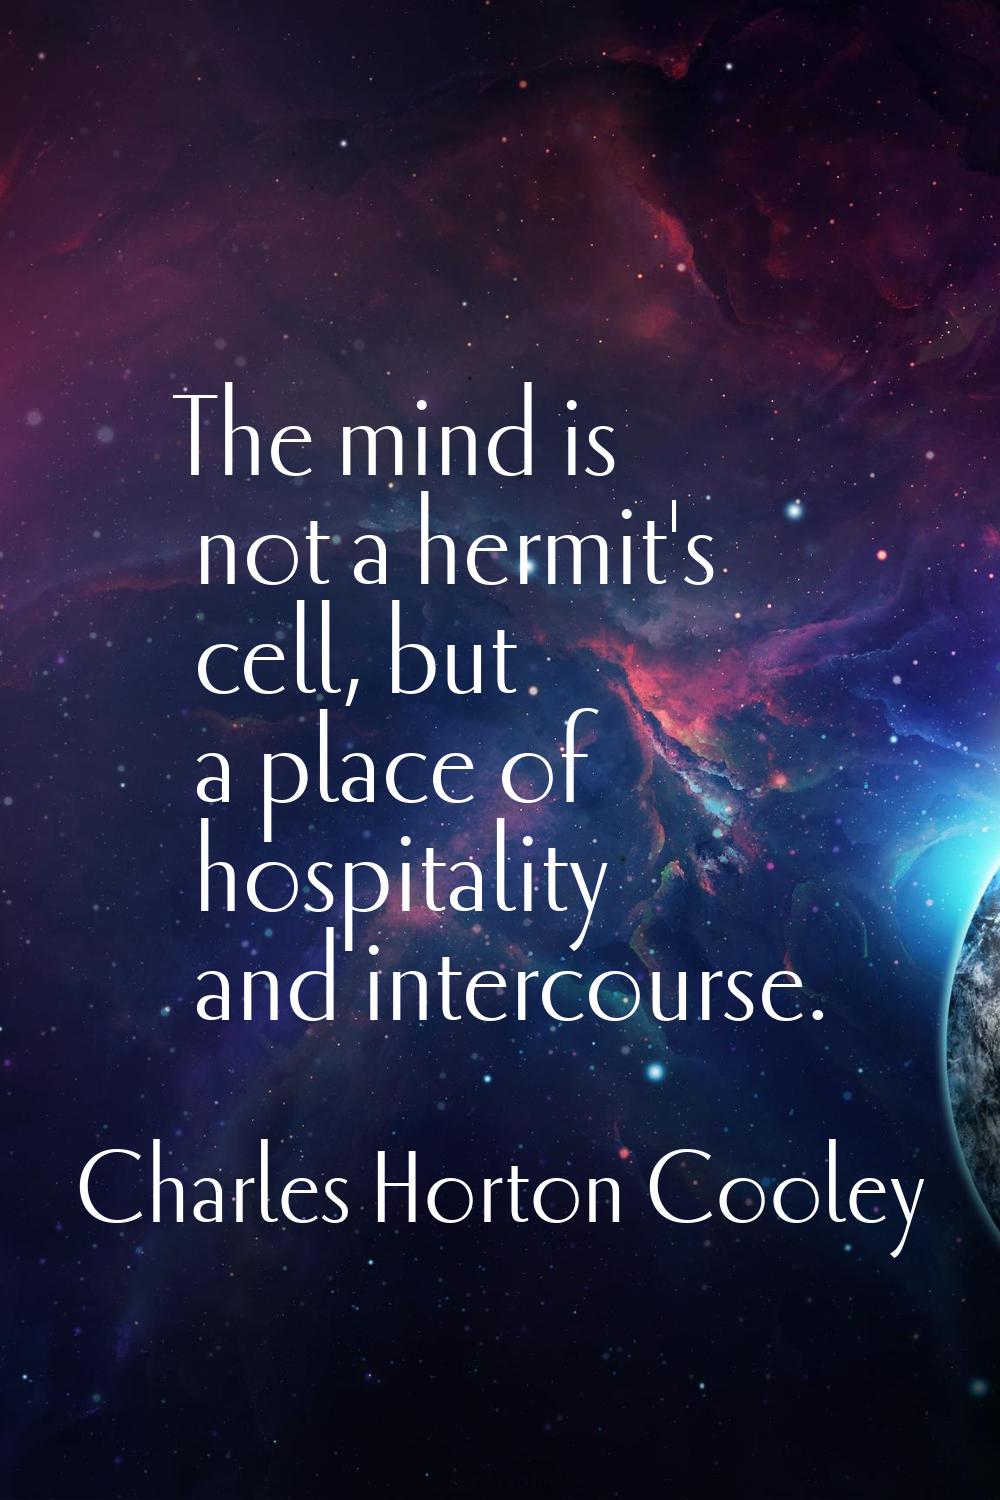 The mind is not a hermit's cell, but a place of hospitality and intercourse.